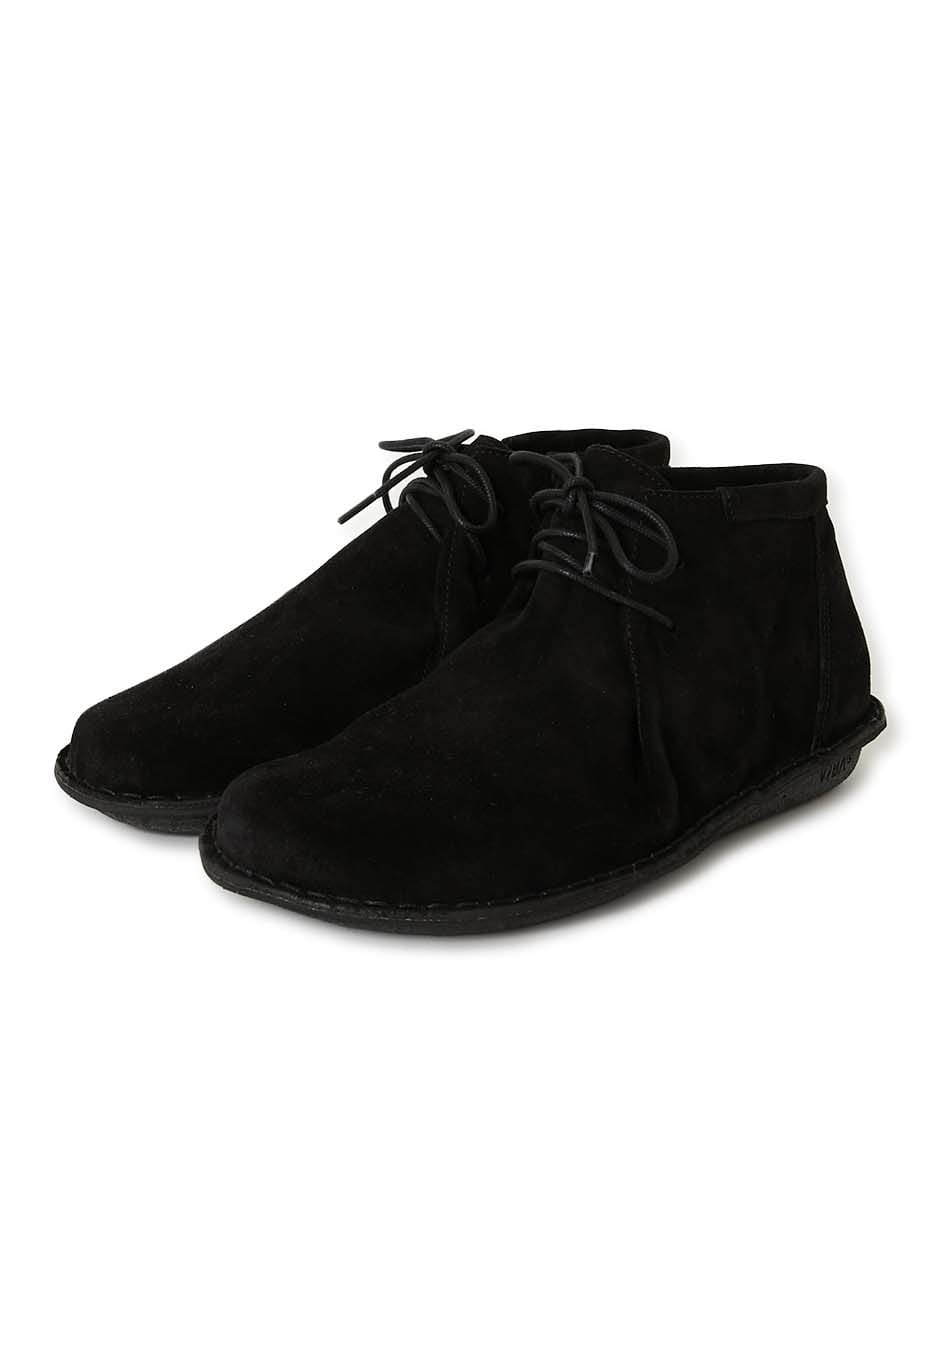 VIBAe /JTREE Suede Shoes